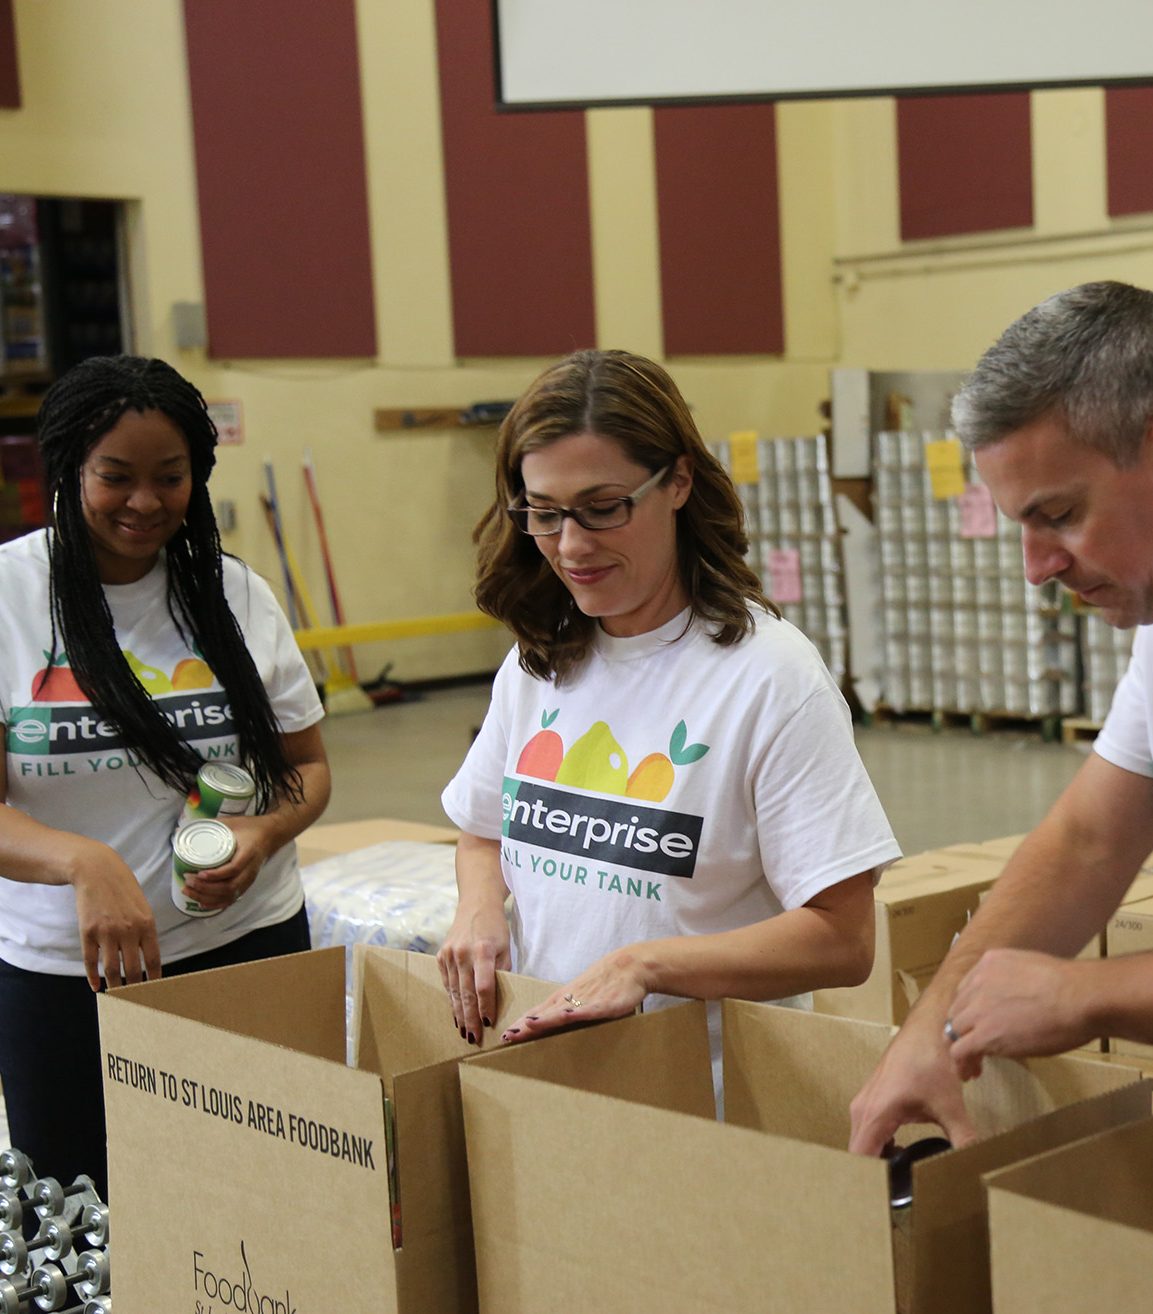 Two female Enterprise employees and one male employee, all wearing white Enterprise Fill Your Tank t-shirts, pack boxes during a community service project.